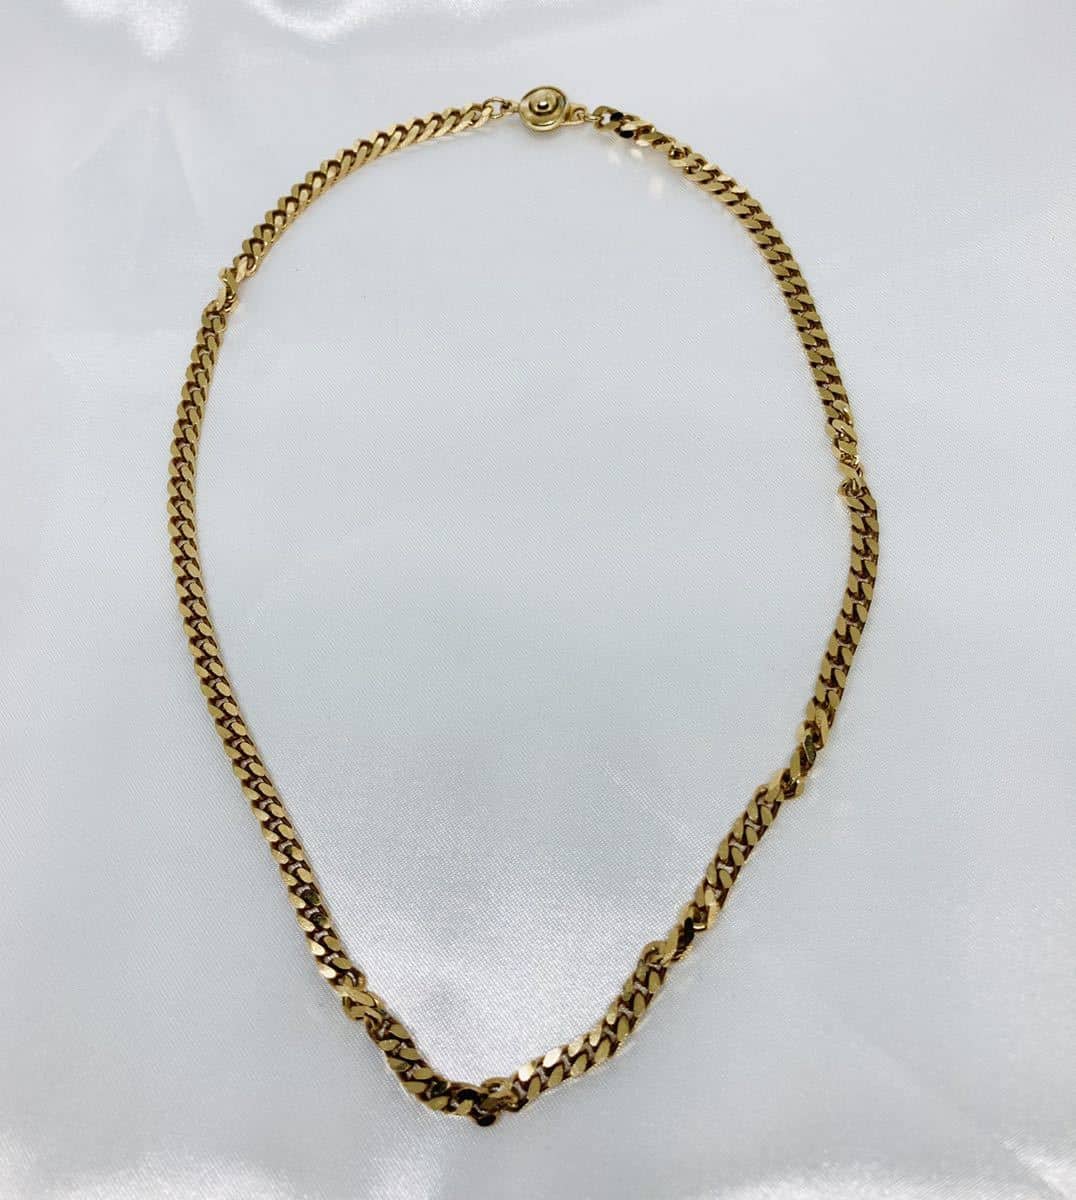 [Used]Kihei gold necklace 41cm USA PAT 2007 4074400 vintage - BE ...